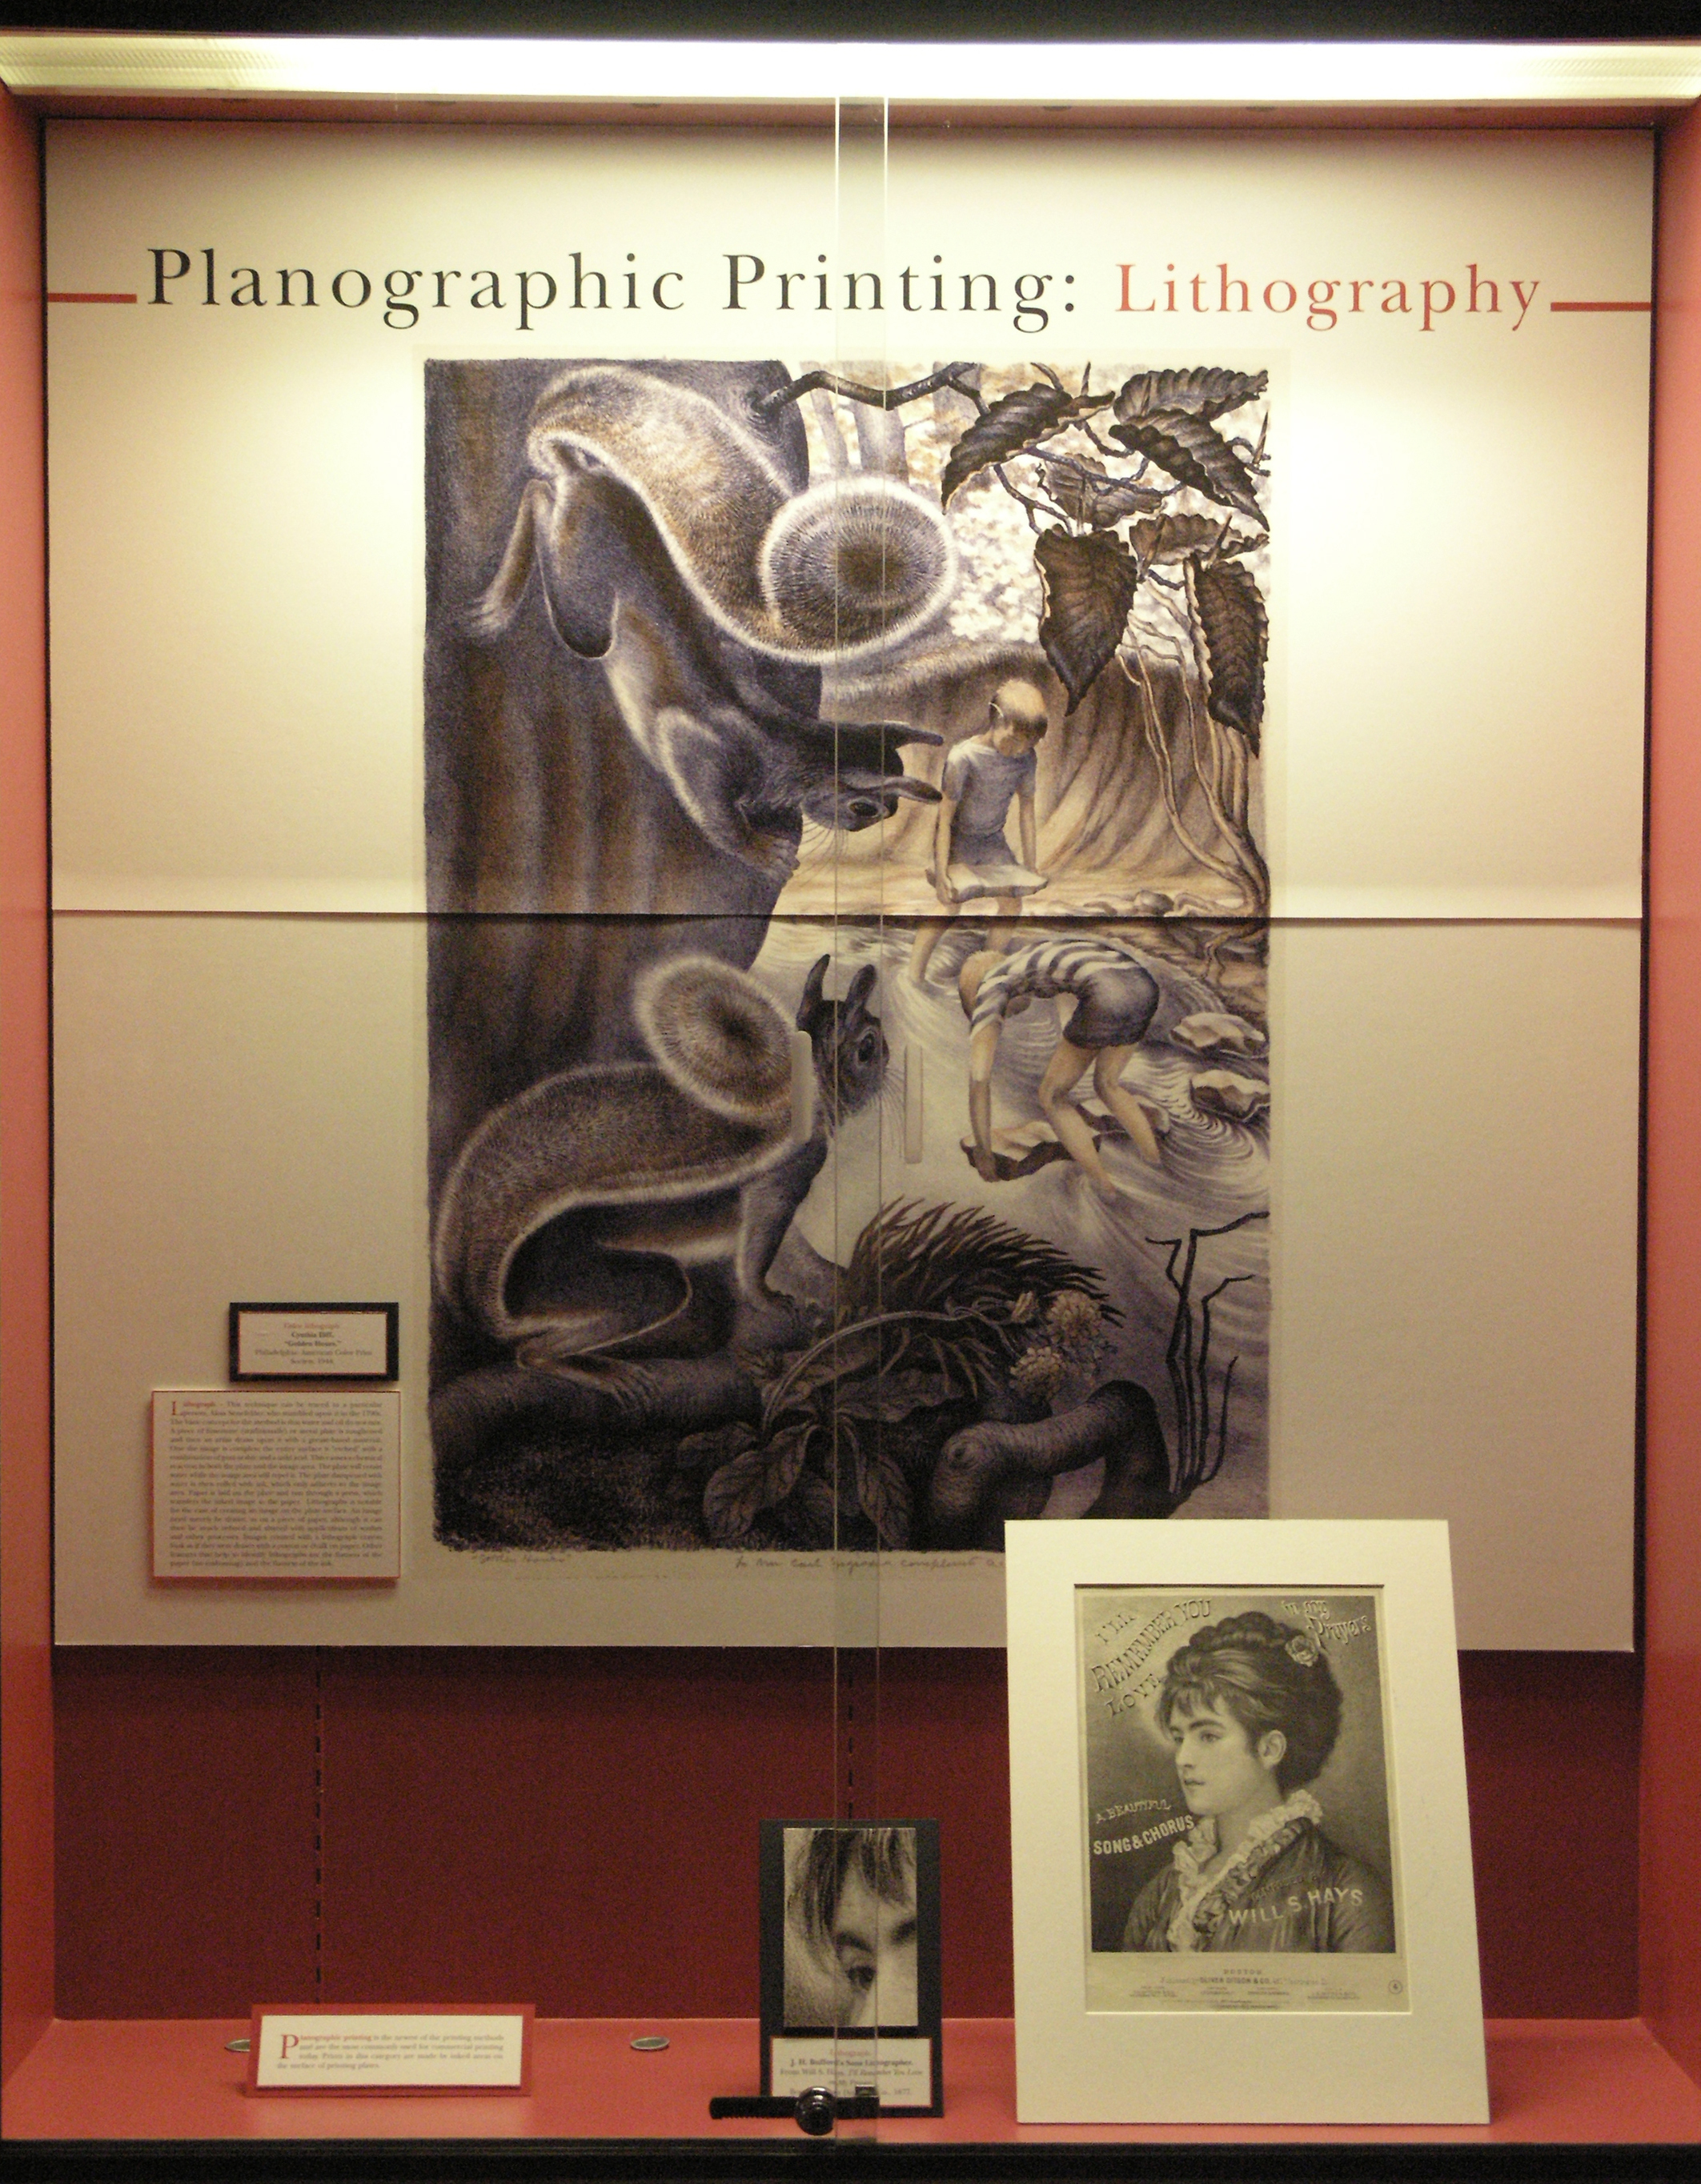 Case 9 - Planographic Printing: Lithography